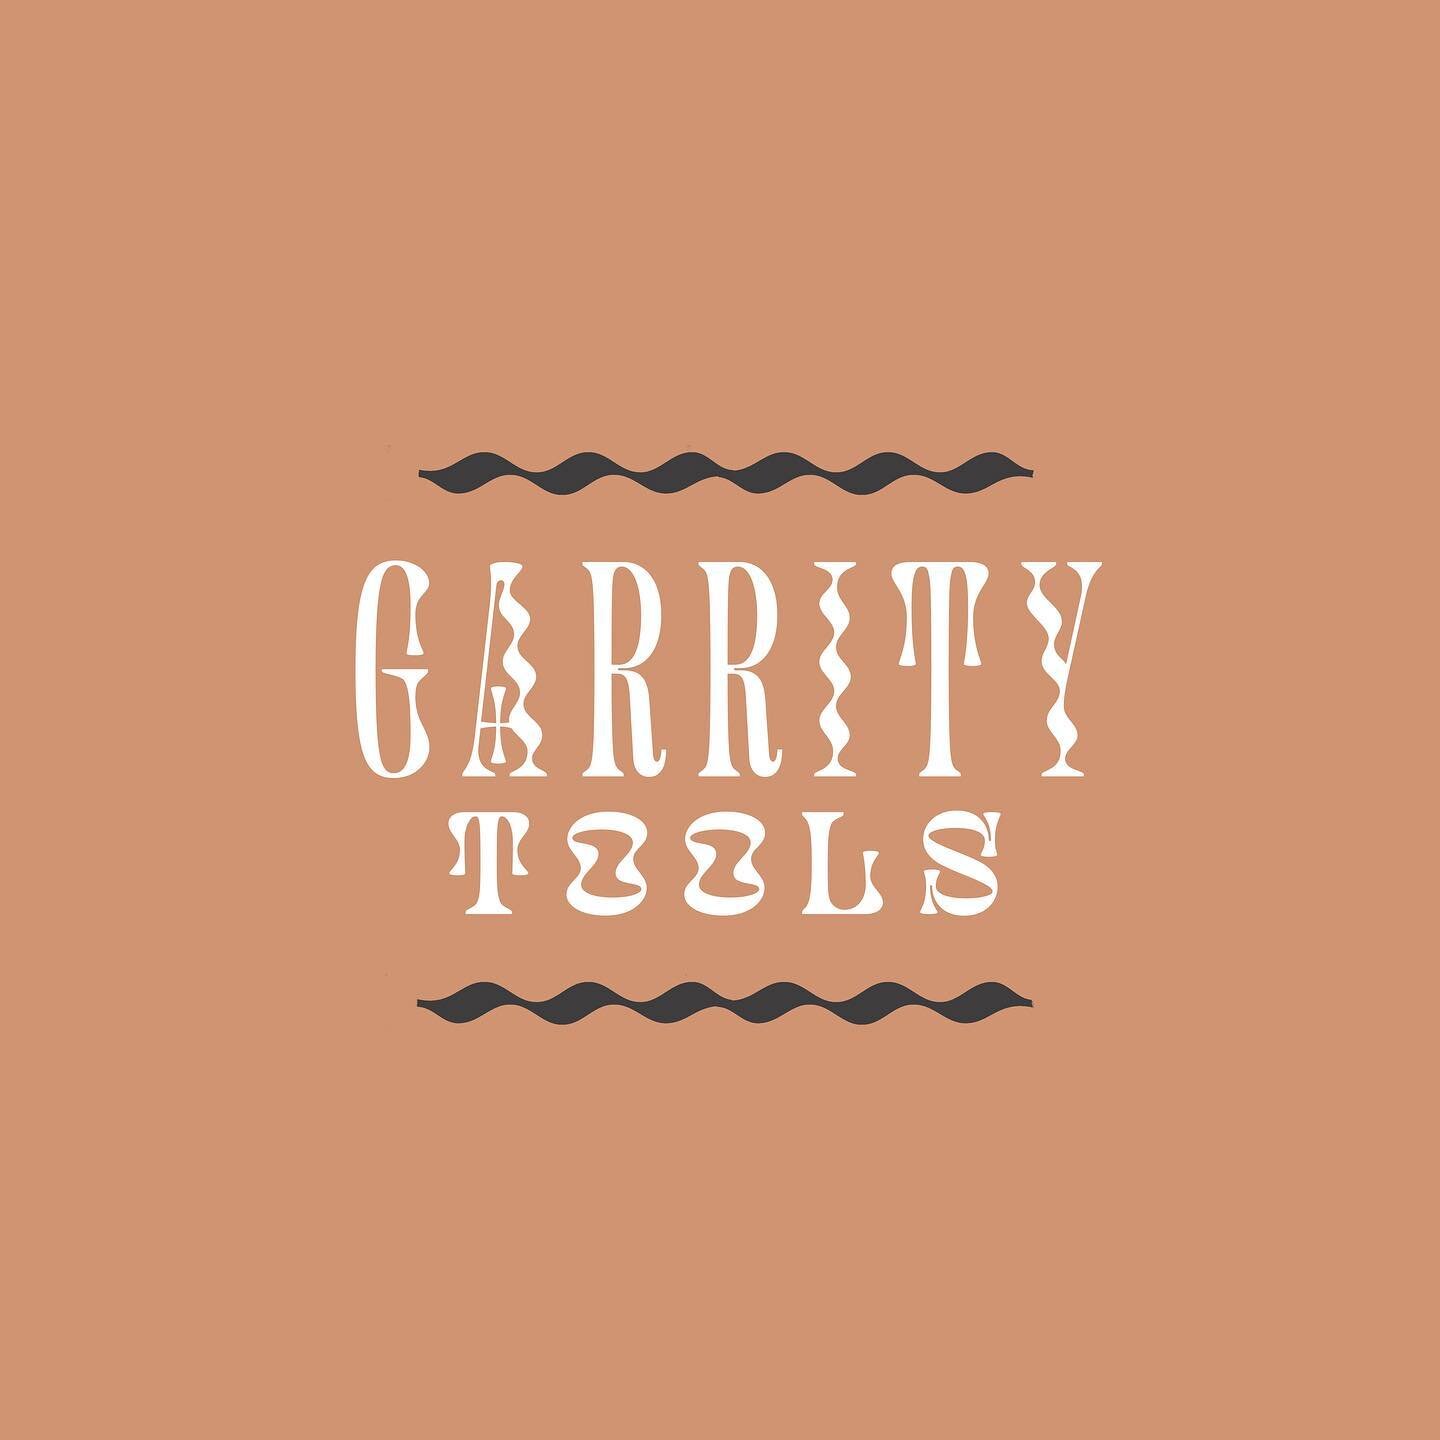 @collingarrity from @garritytools joins us this week!  Based in St. Louis, Missouri, Collin and the team at Garrity Tools are the makers of your new favorite clay tool. They are currently expanding their wood working operation and thinking big for th